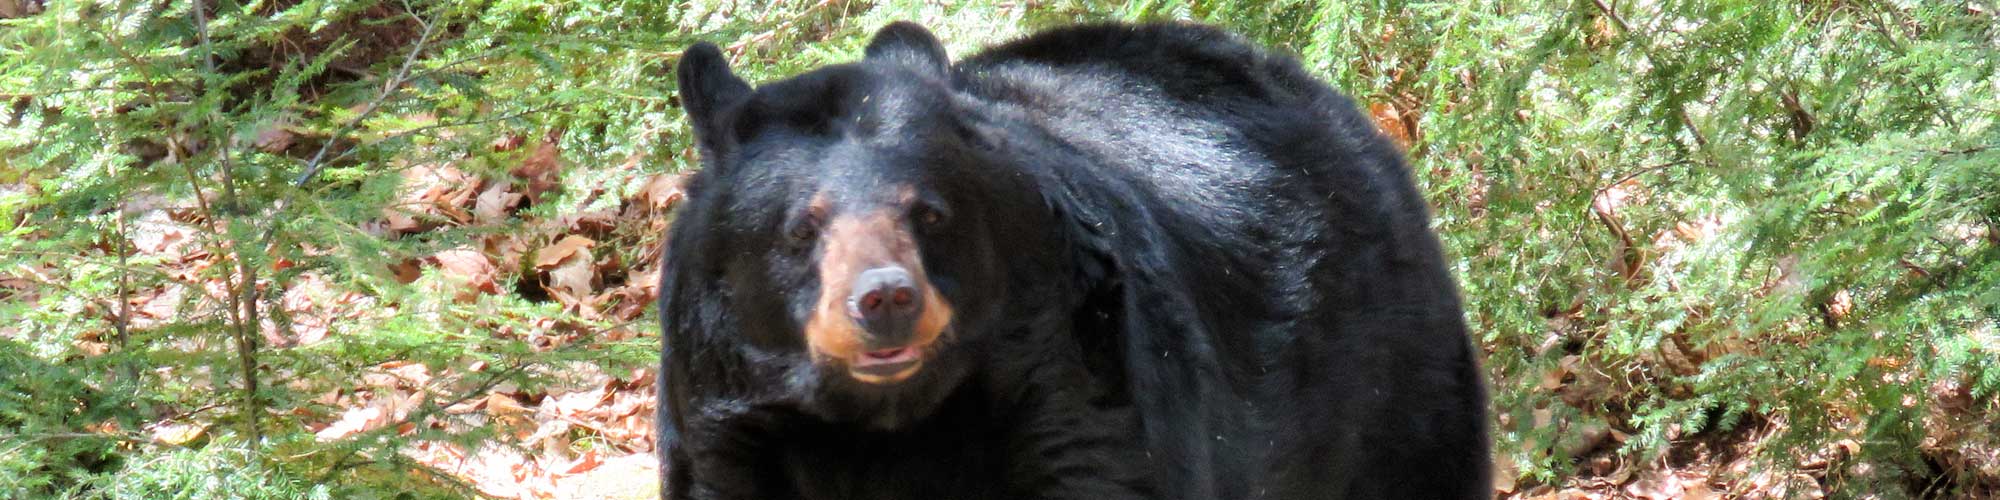 Black Bear - Photo is from Squam Lakes Natural Science Center, used with permission.